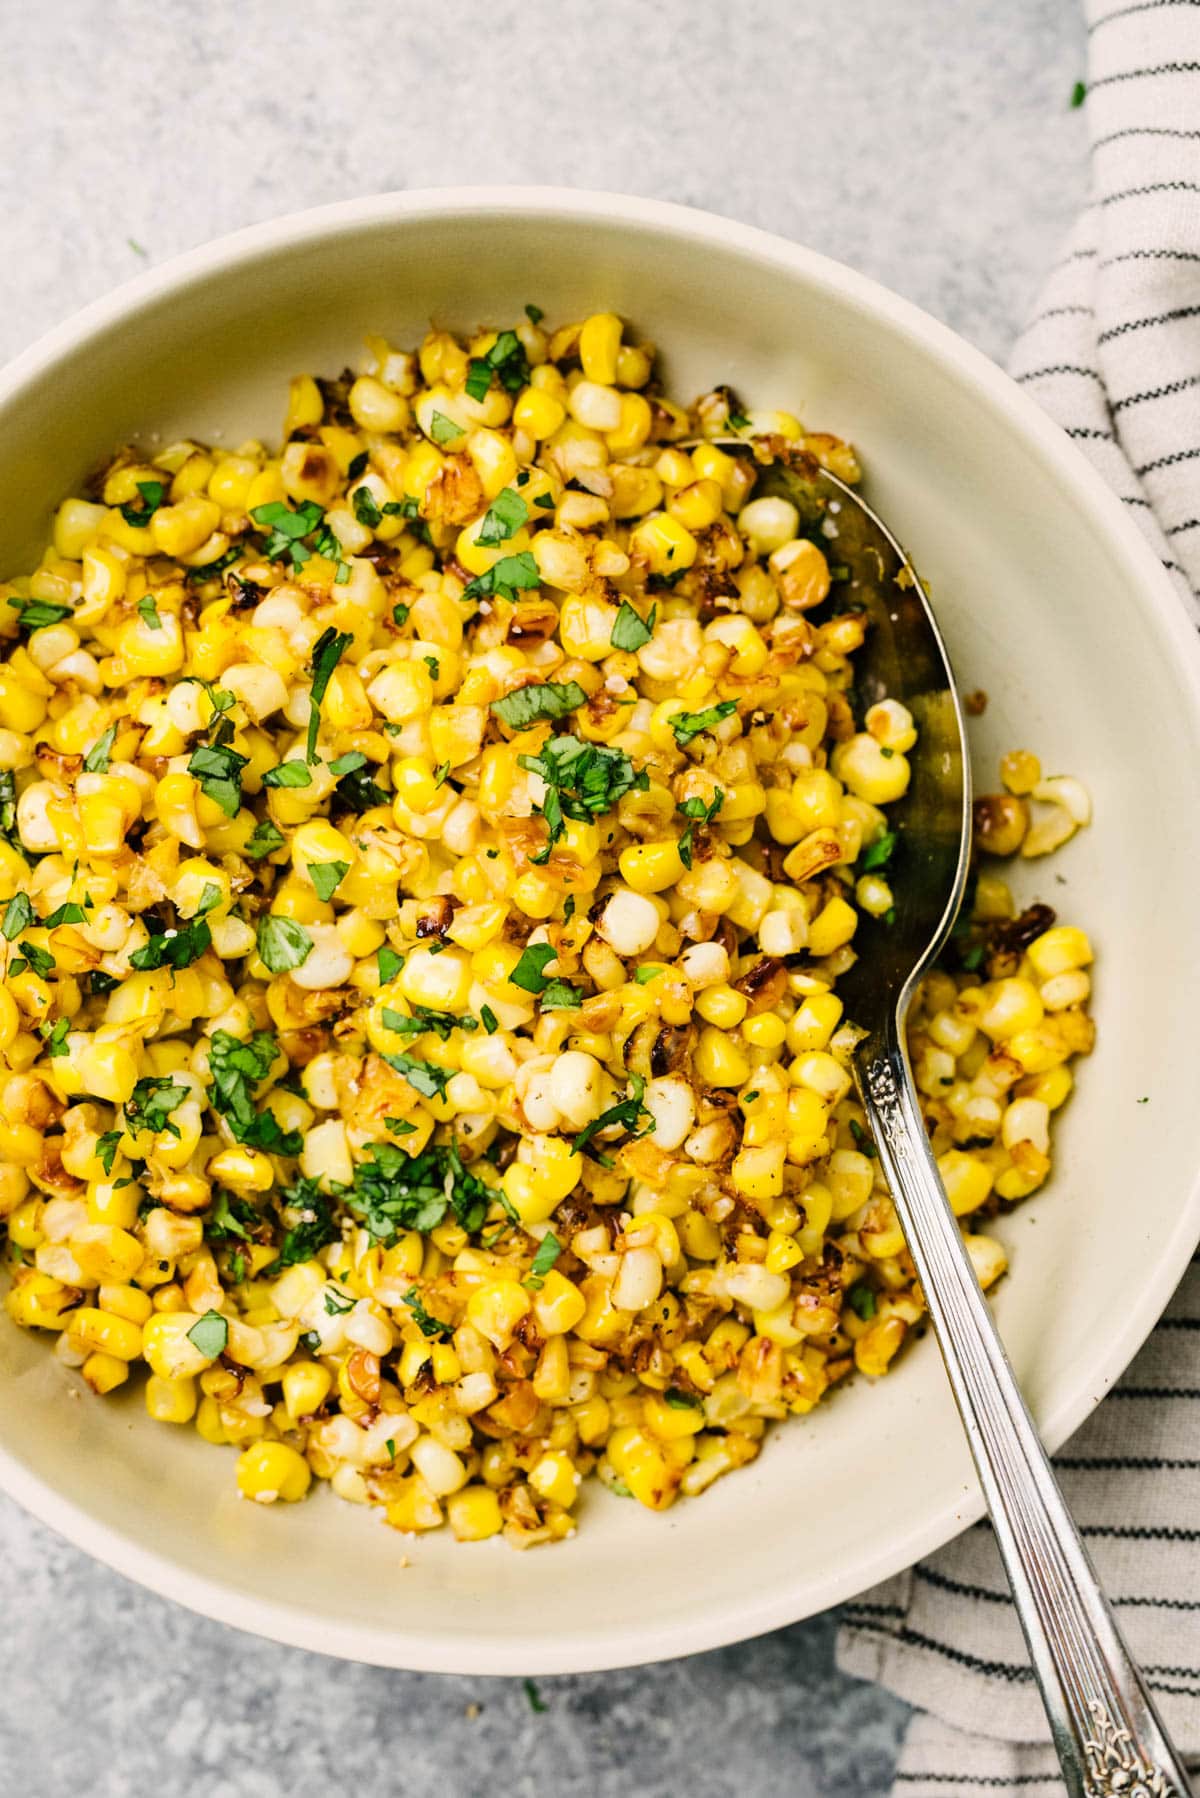 A spoon tucked into a bowl of sauteed skillet corn garnished with basil; striped linen napkin tucked to the side of the bowl.